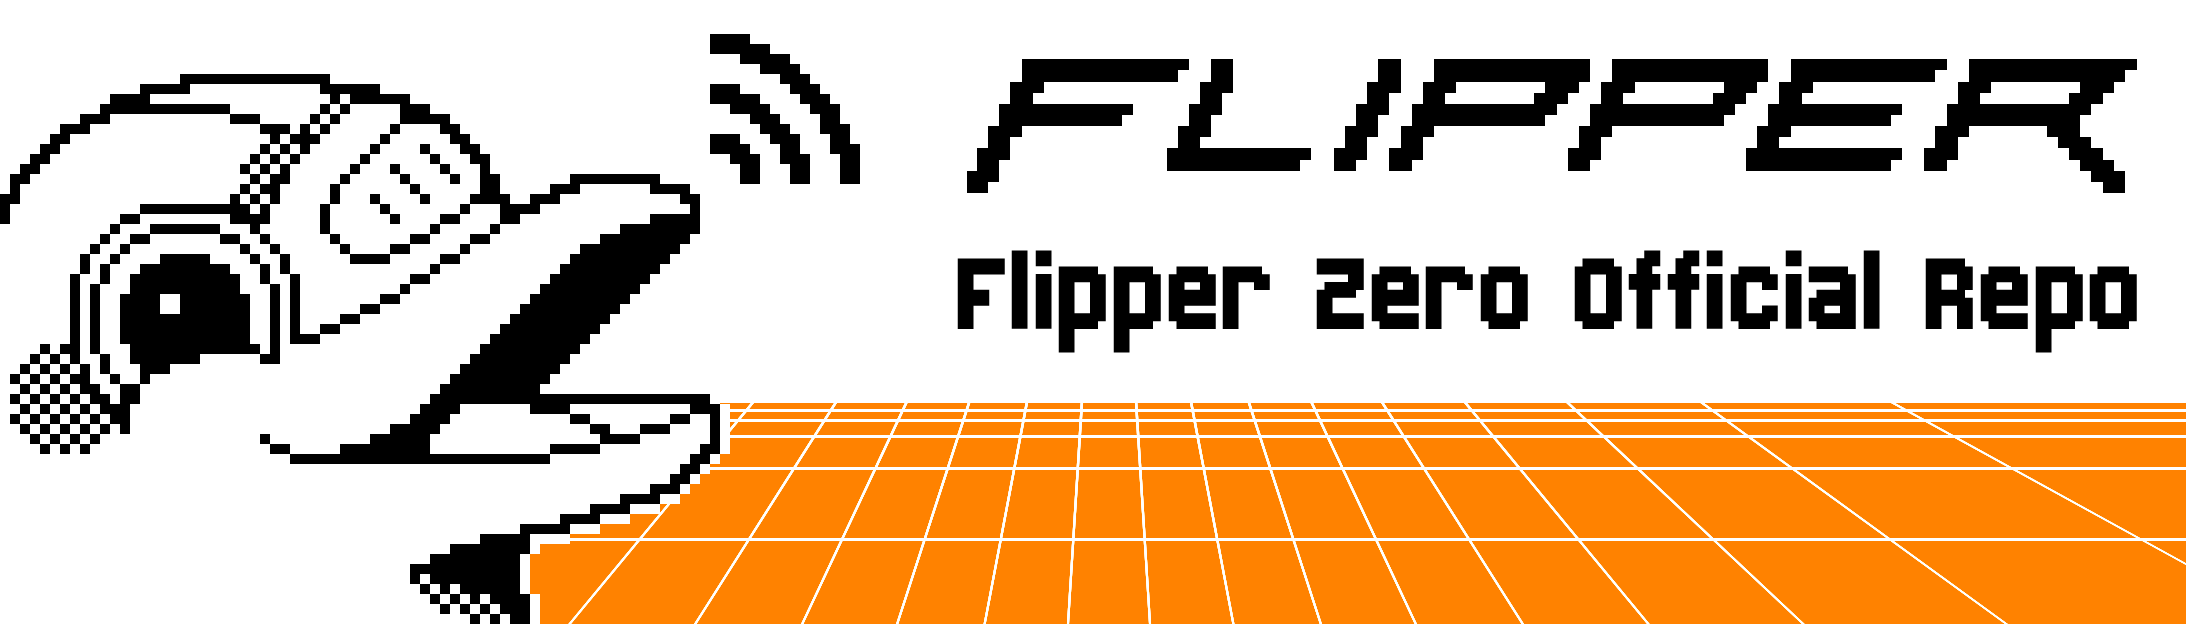 A pixel art of a Dophin with text: Flipper Zero Official Repo